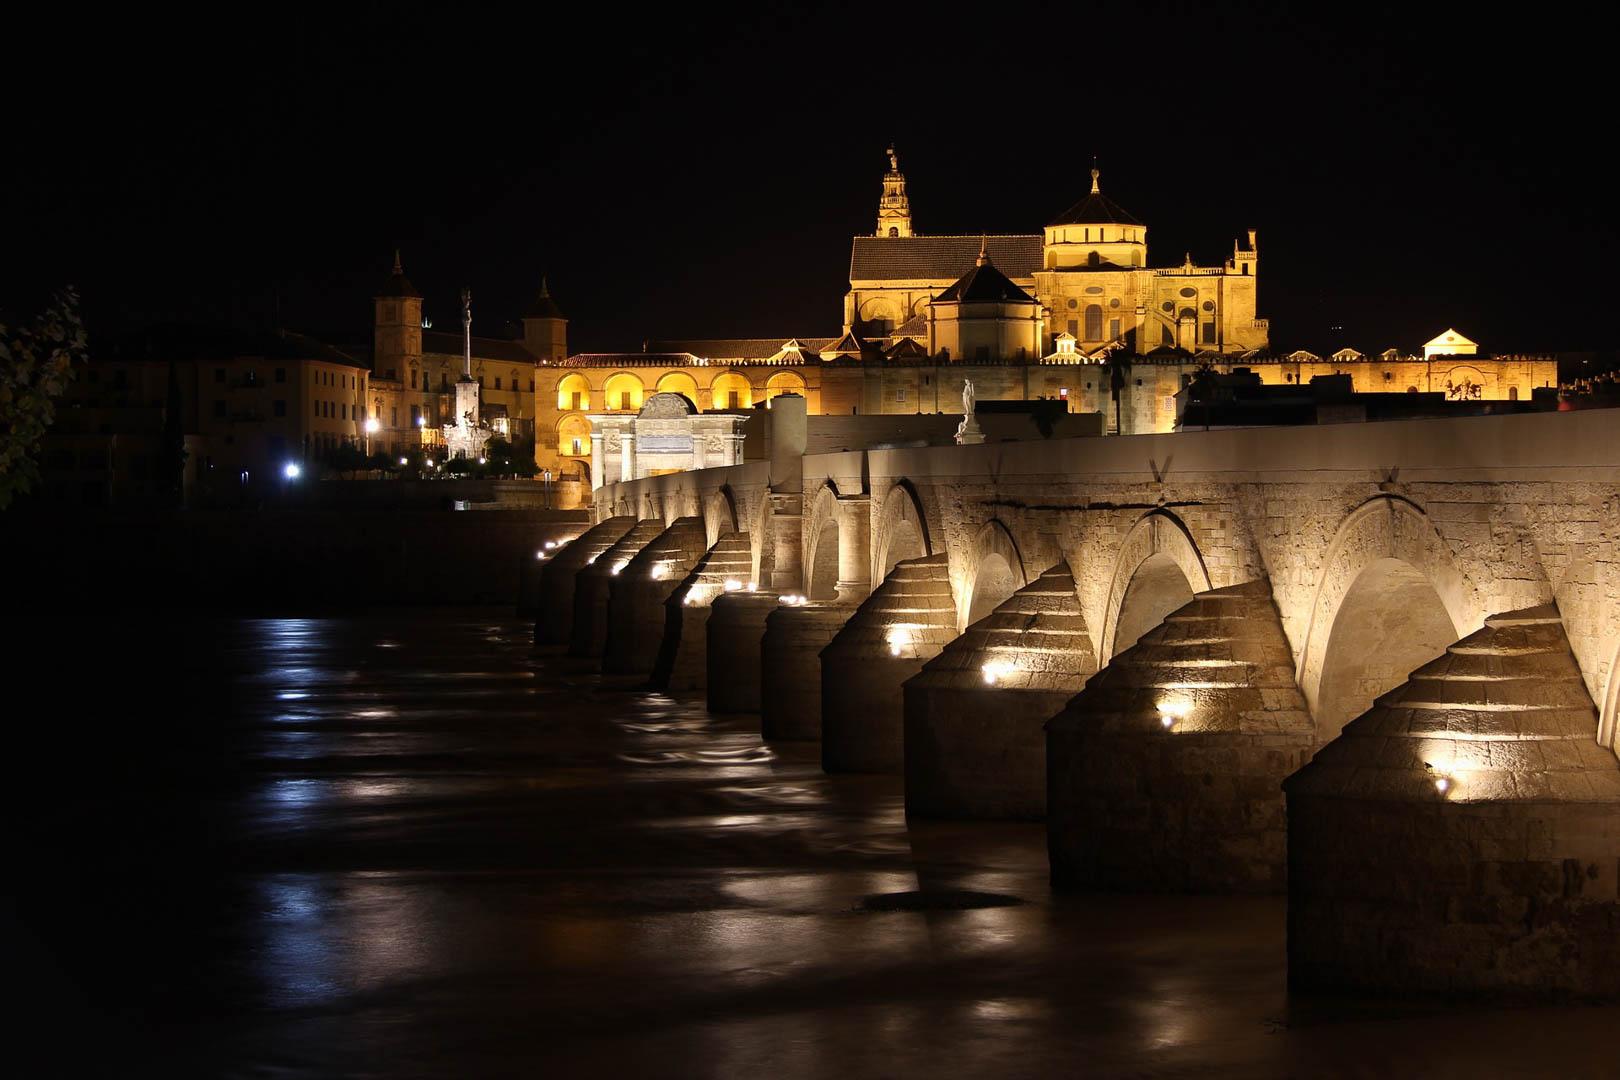 cordoba day trip from madrid to see the old bridge at night